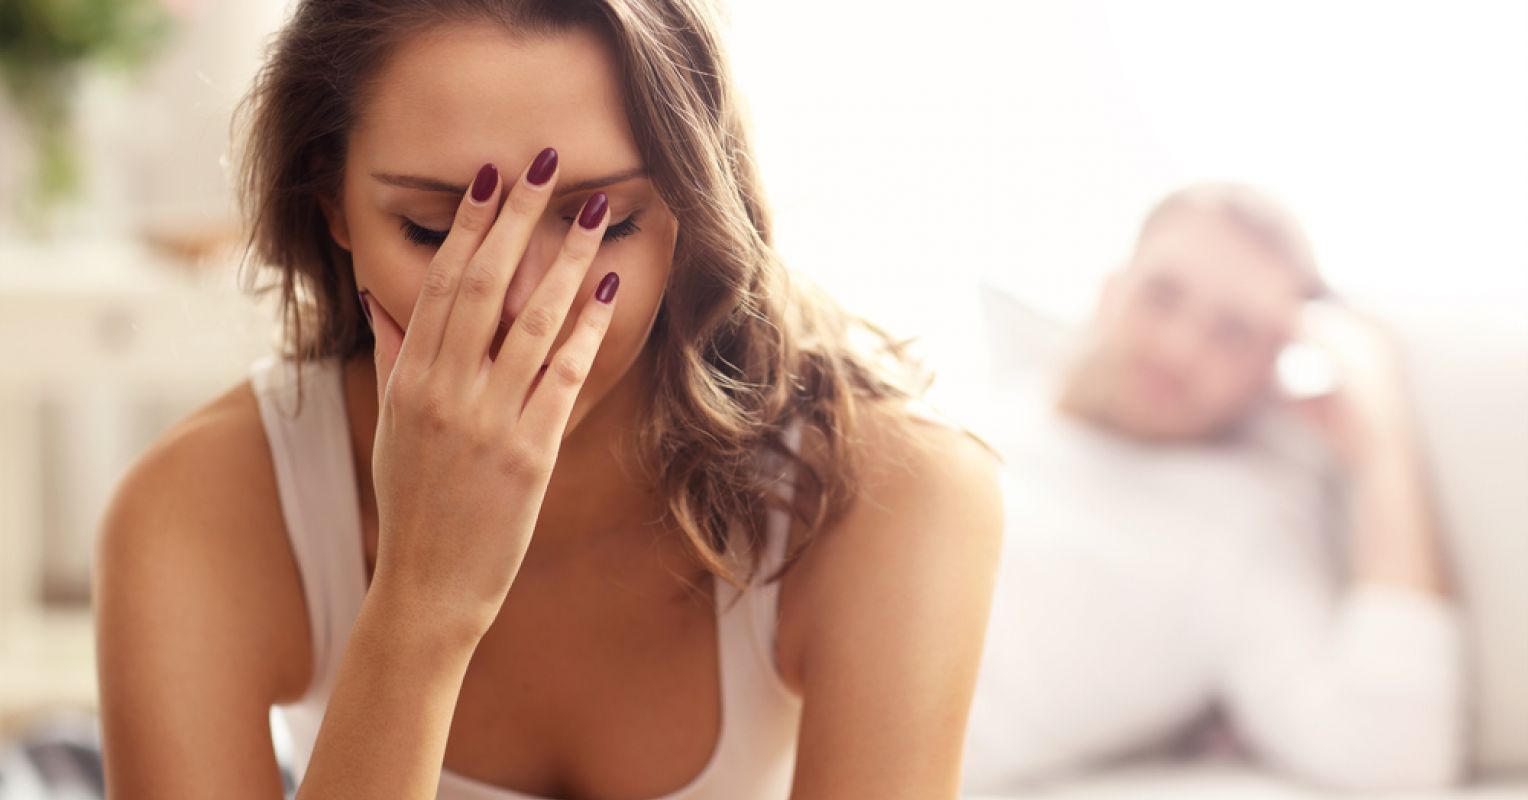 Should You Tell Your Partner You Cheated? Psychology Today